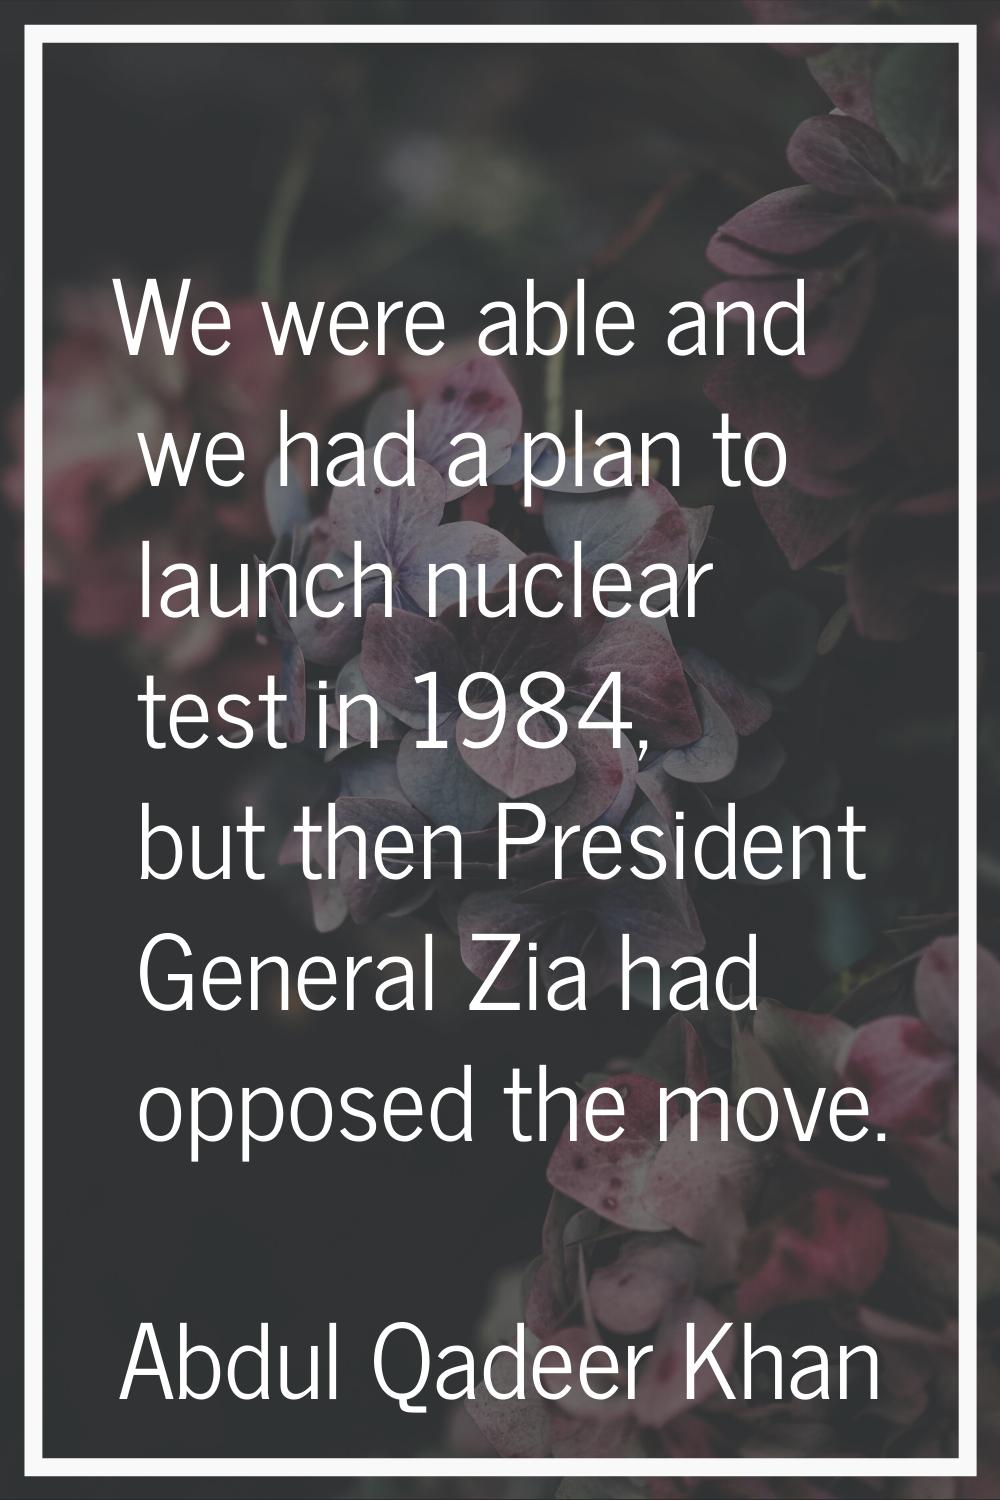 We were able and we had a plan to launch nuclear test in 1984, but then President General Zia had o